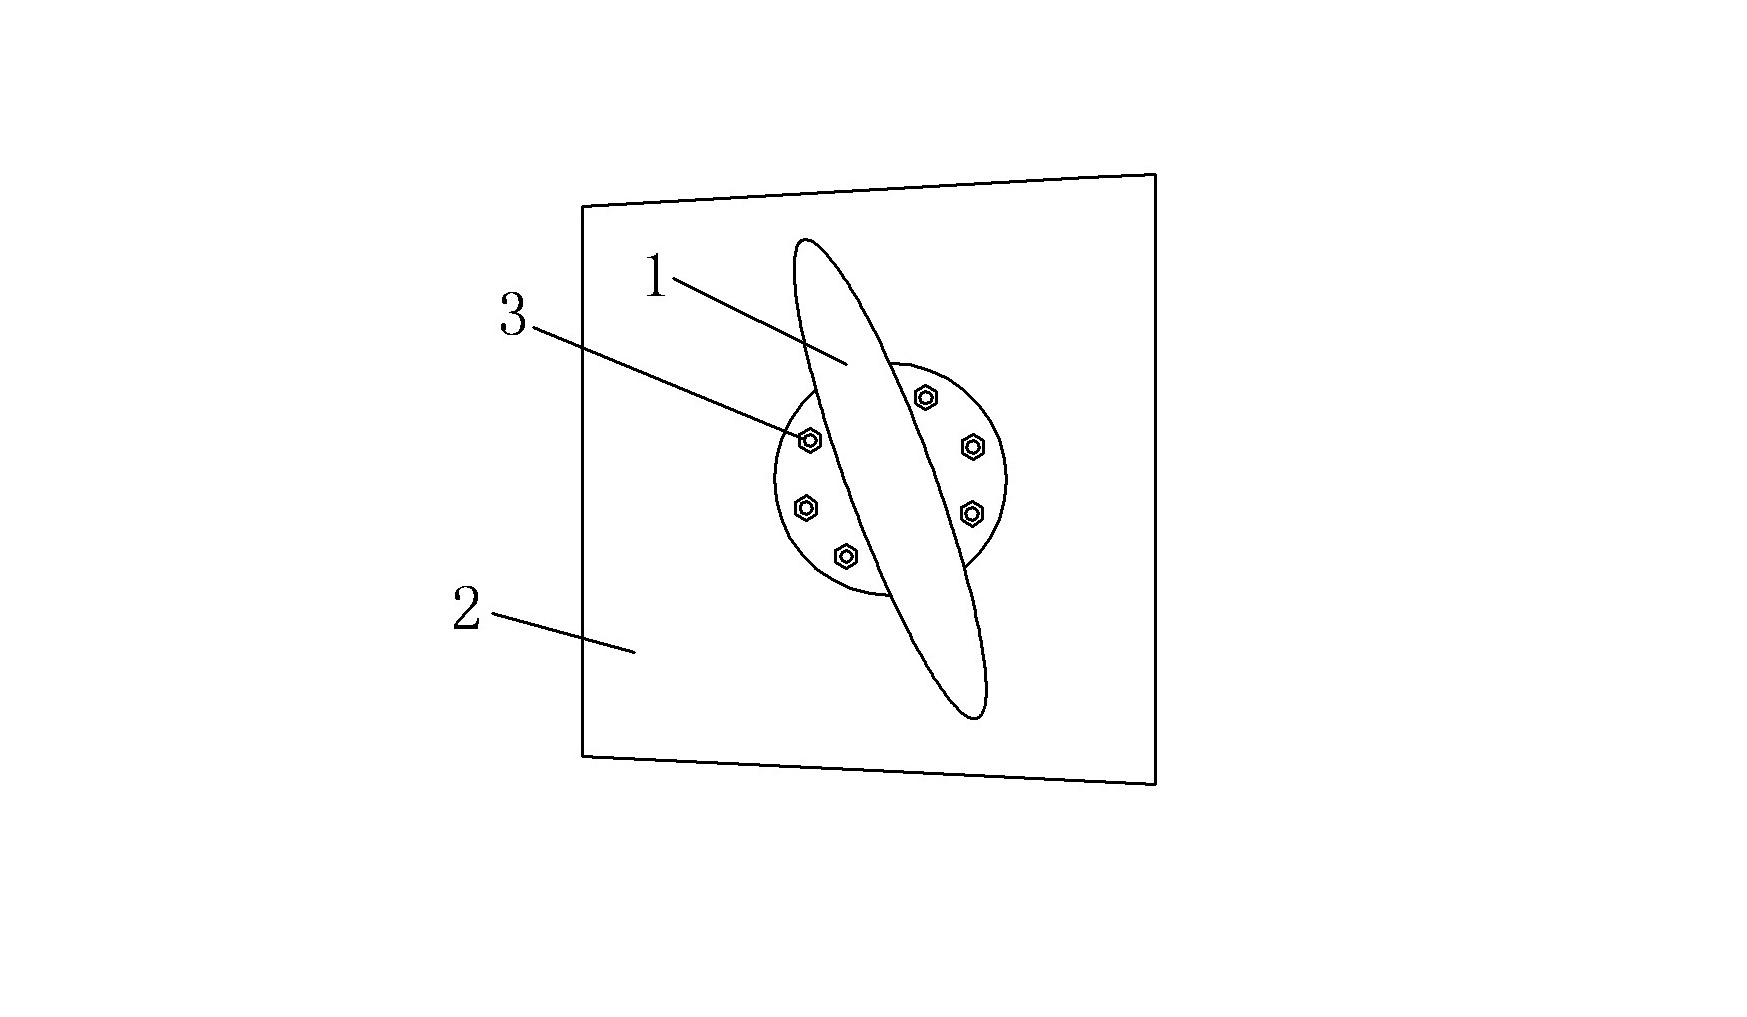 Controllable pitch propeller for ship